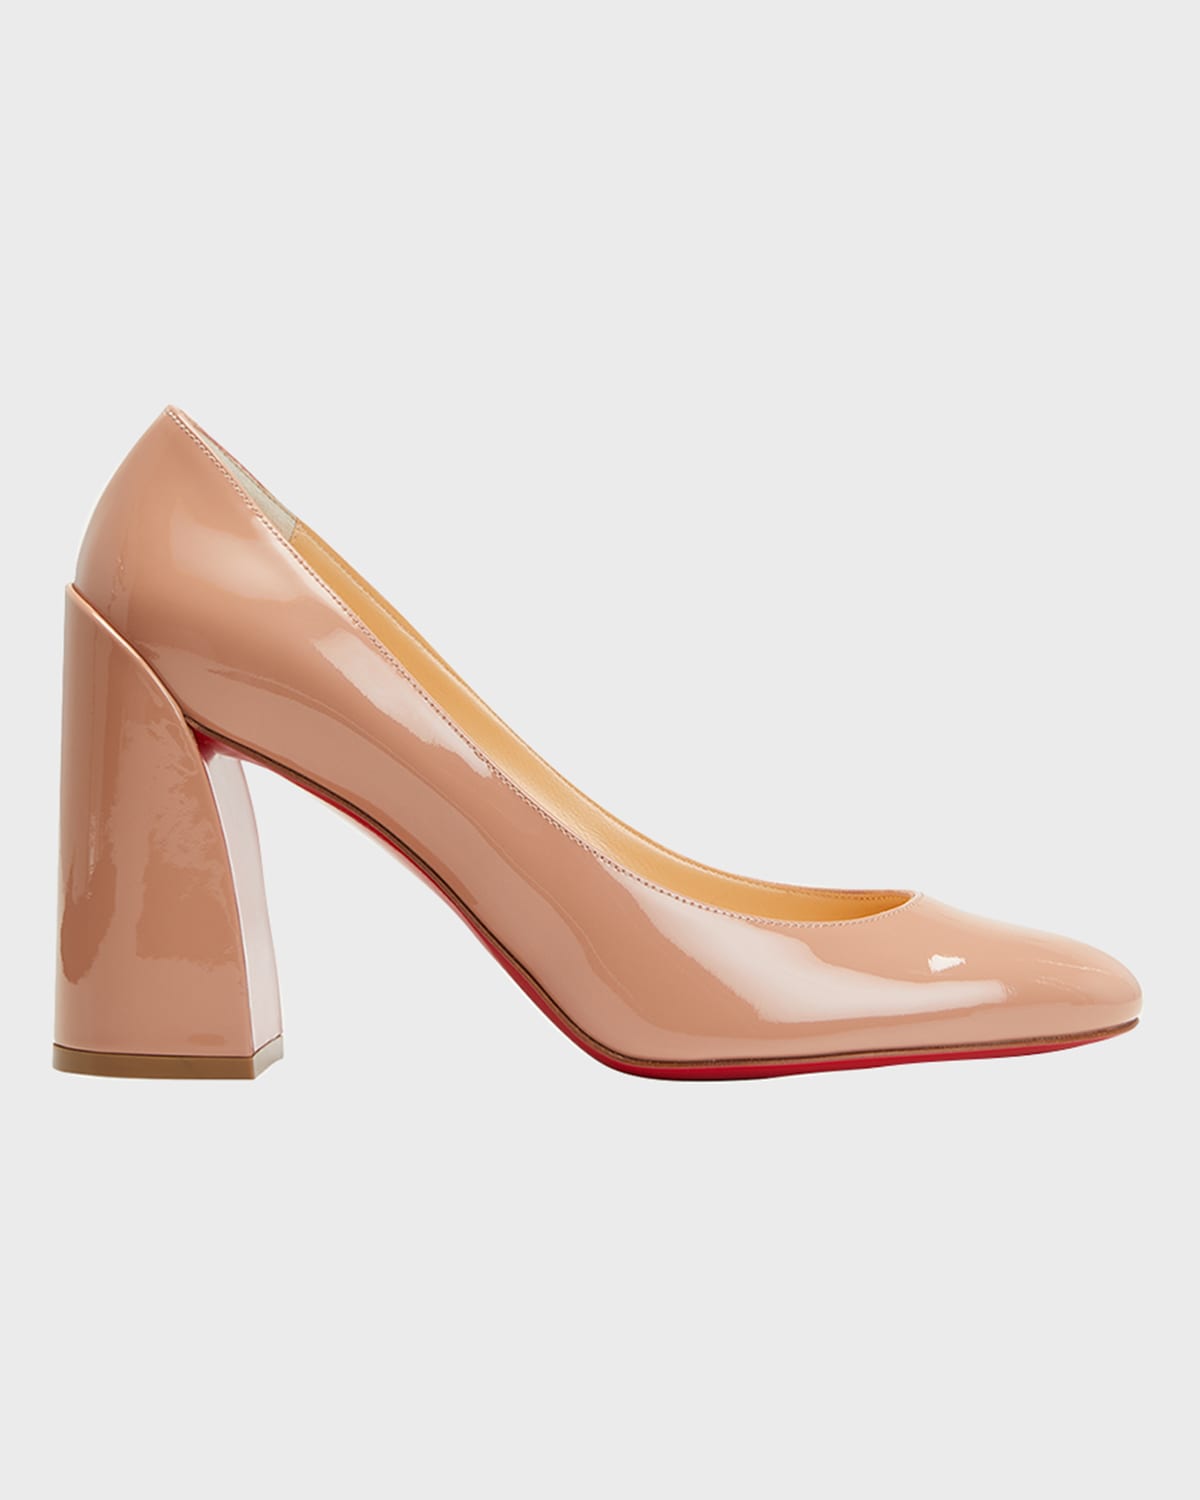 Christian Louboutin Miss Sab Patent Red Sole Pumps In Blush